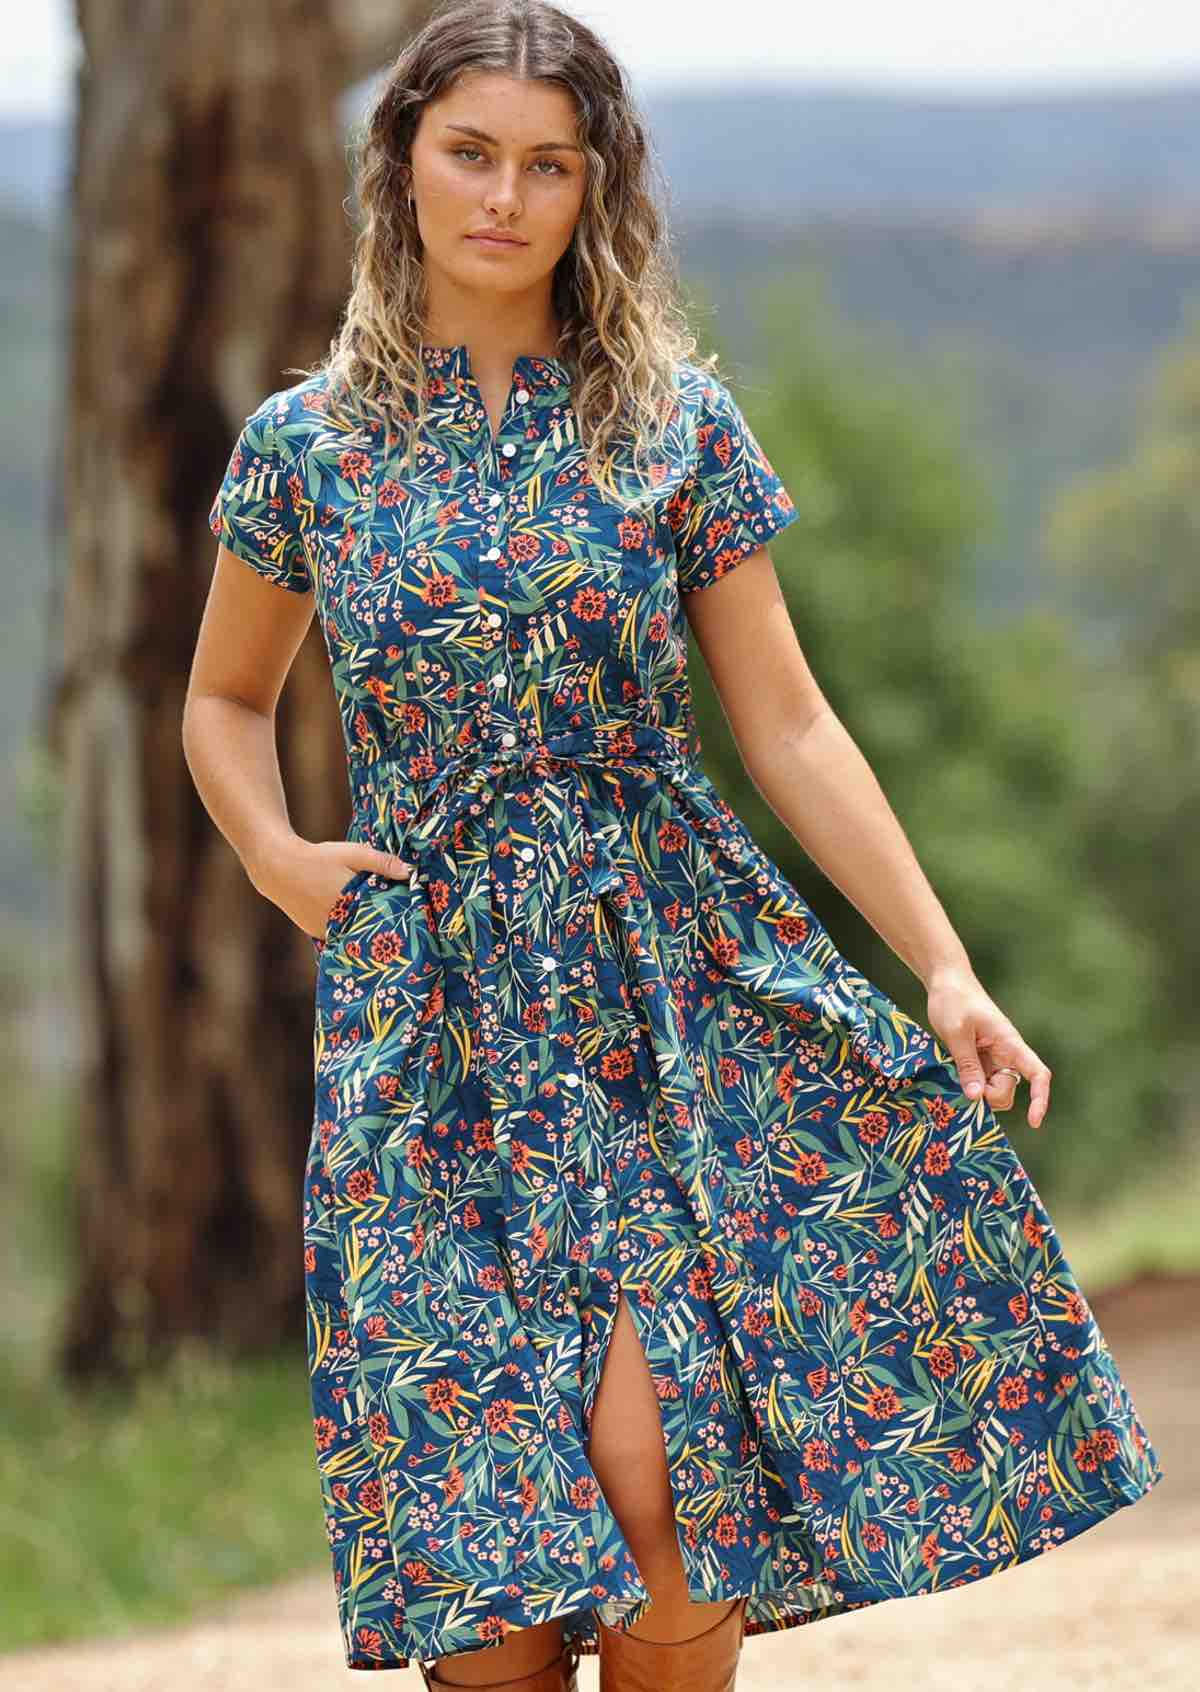 woman wearing floral button up retro style maxi dress trees and hills in background